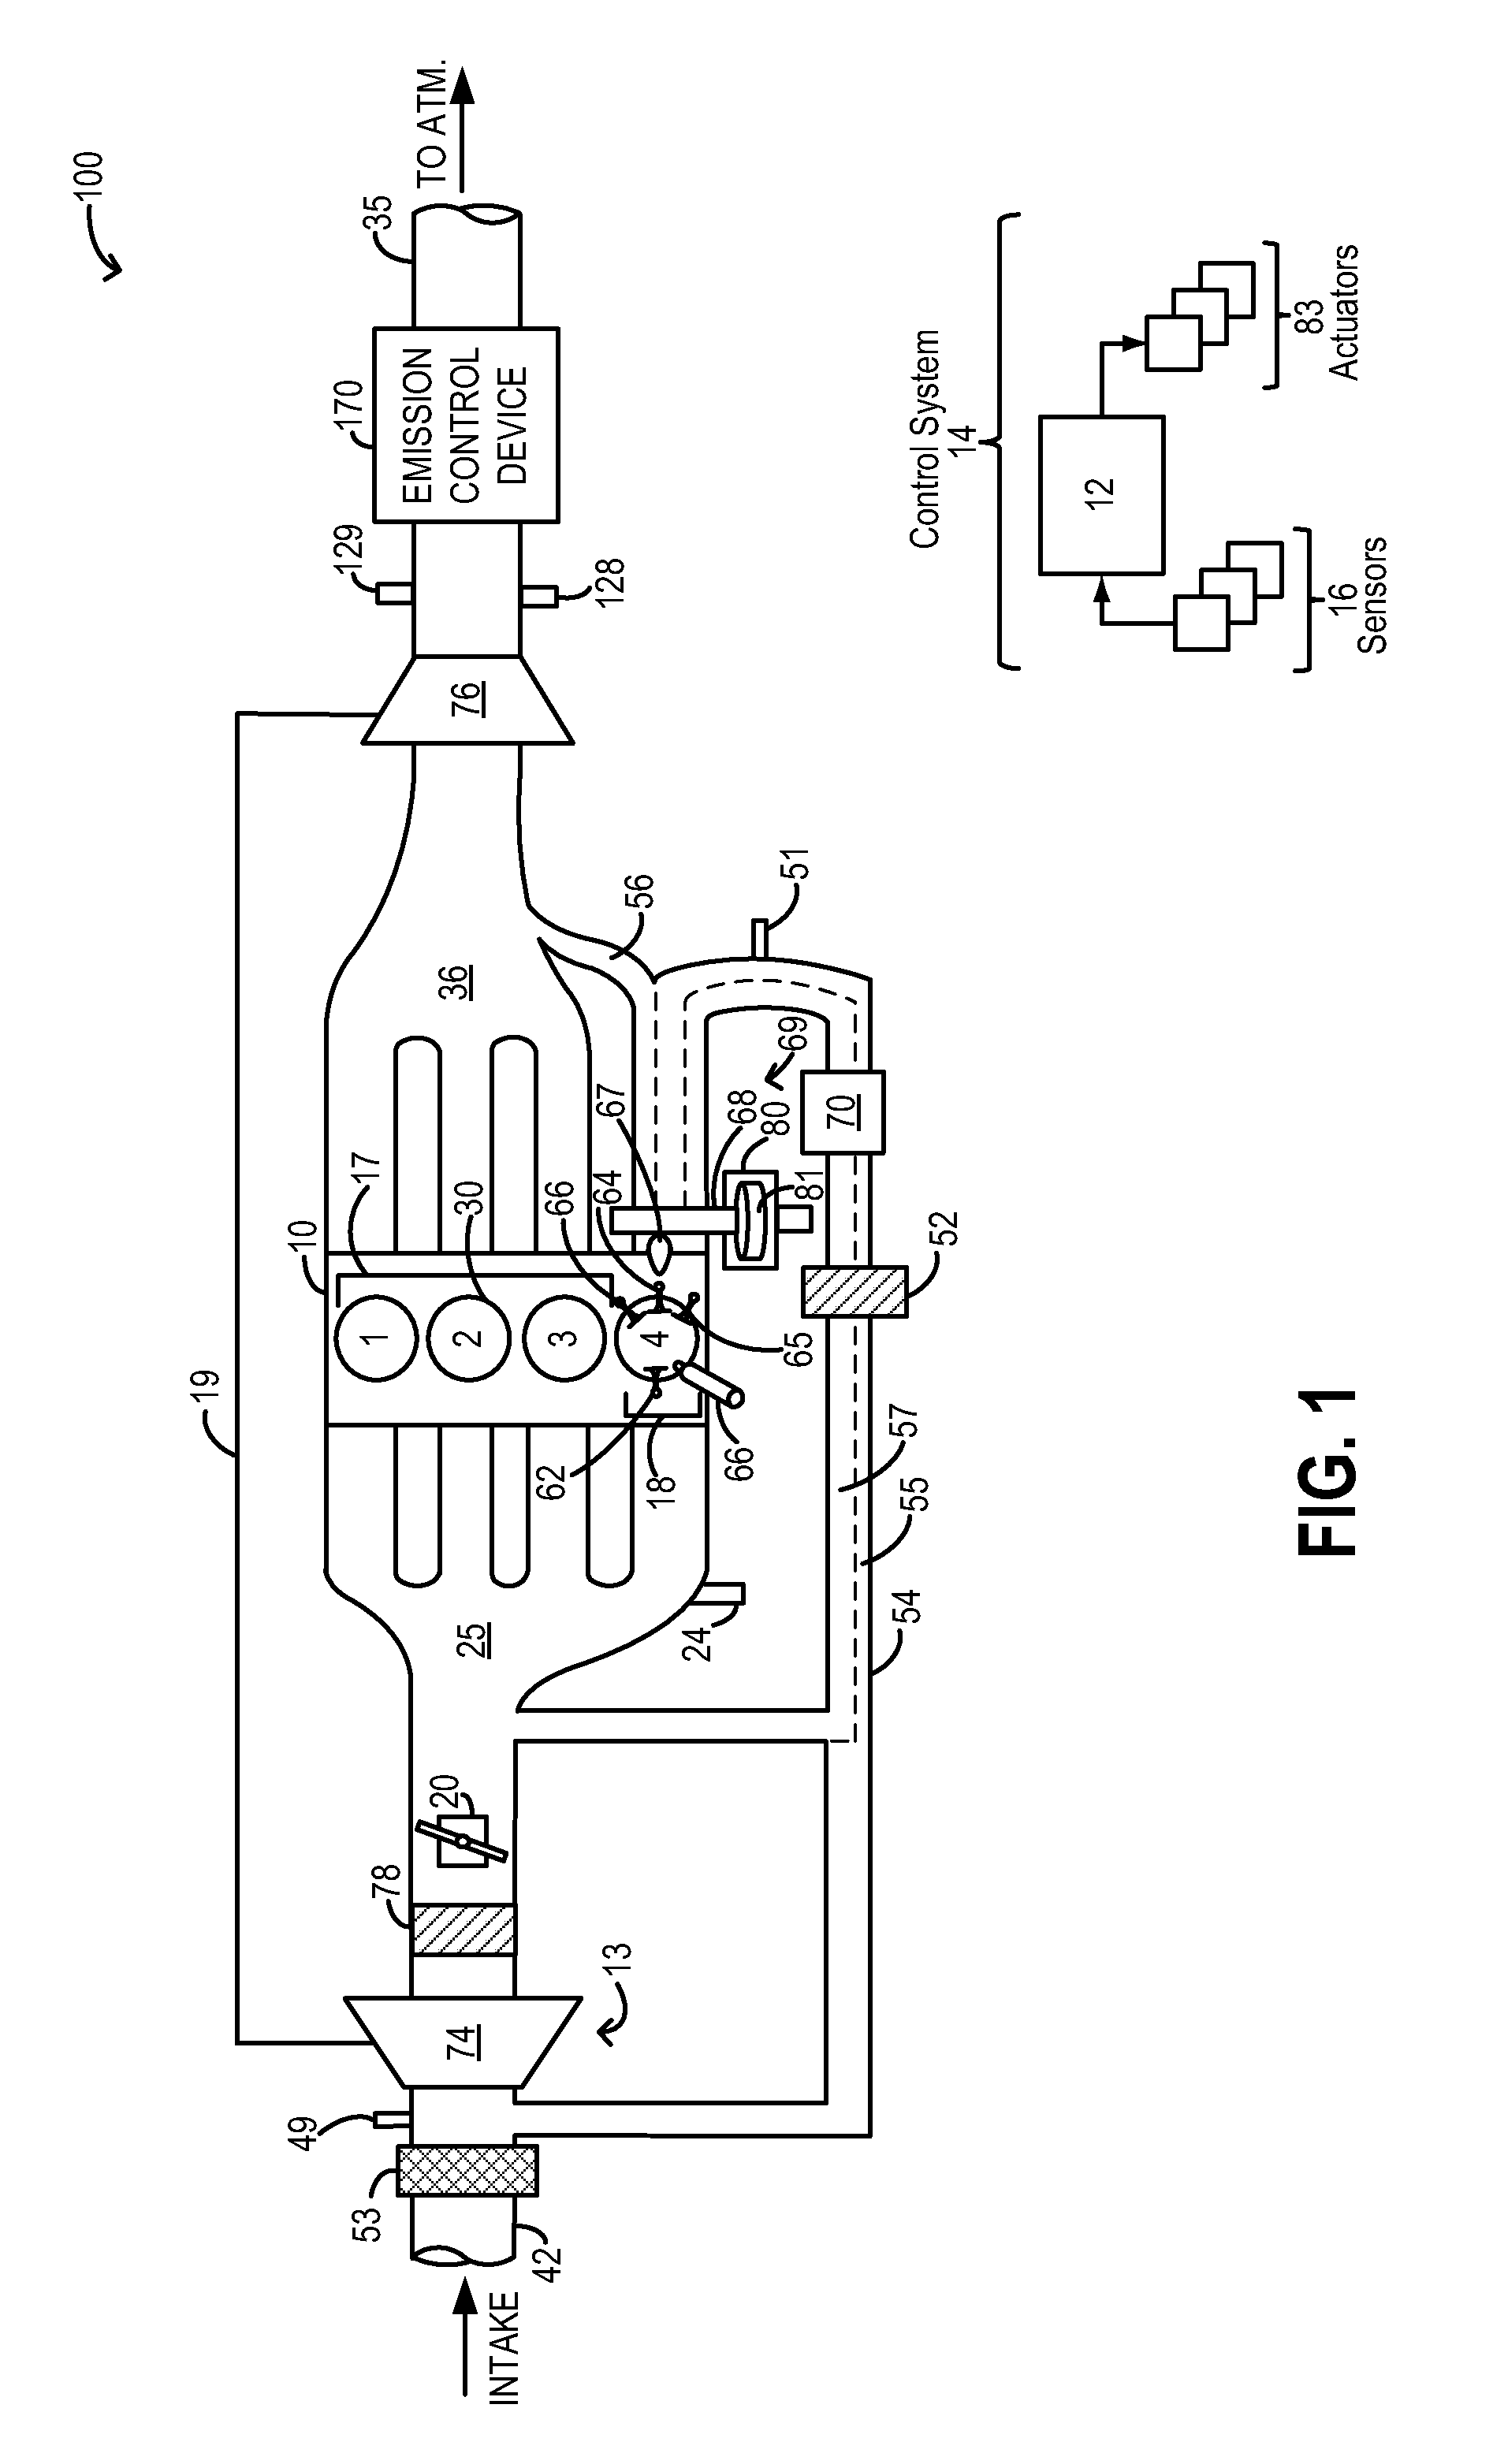 Systems and methods for EGR control